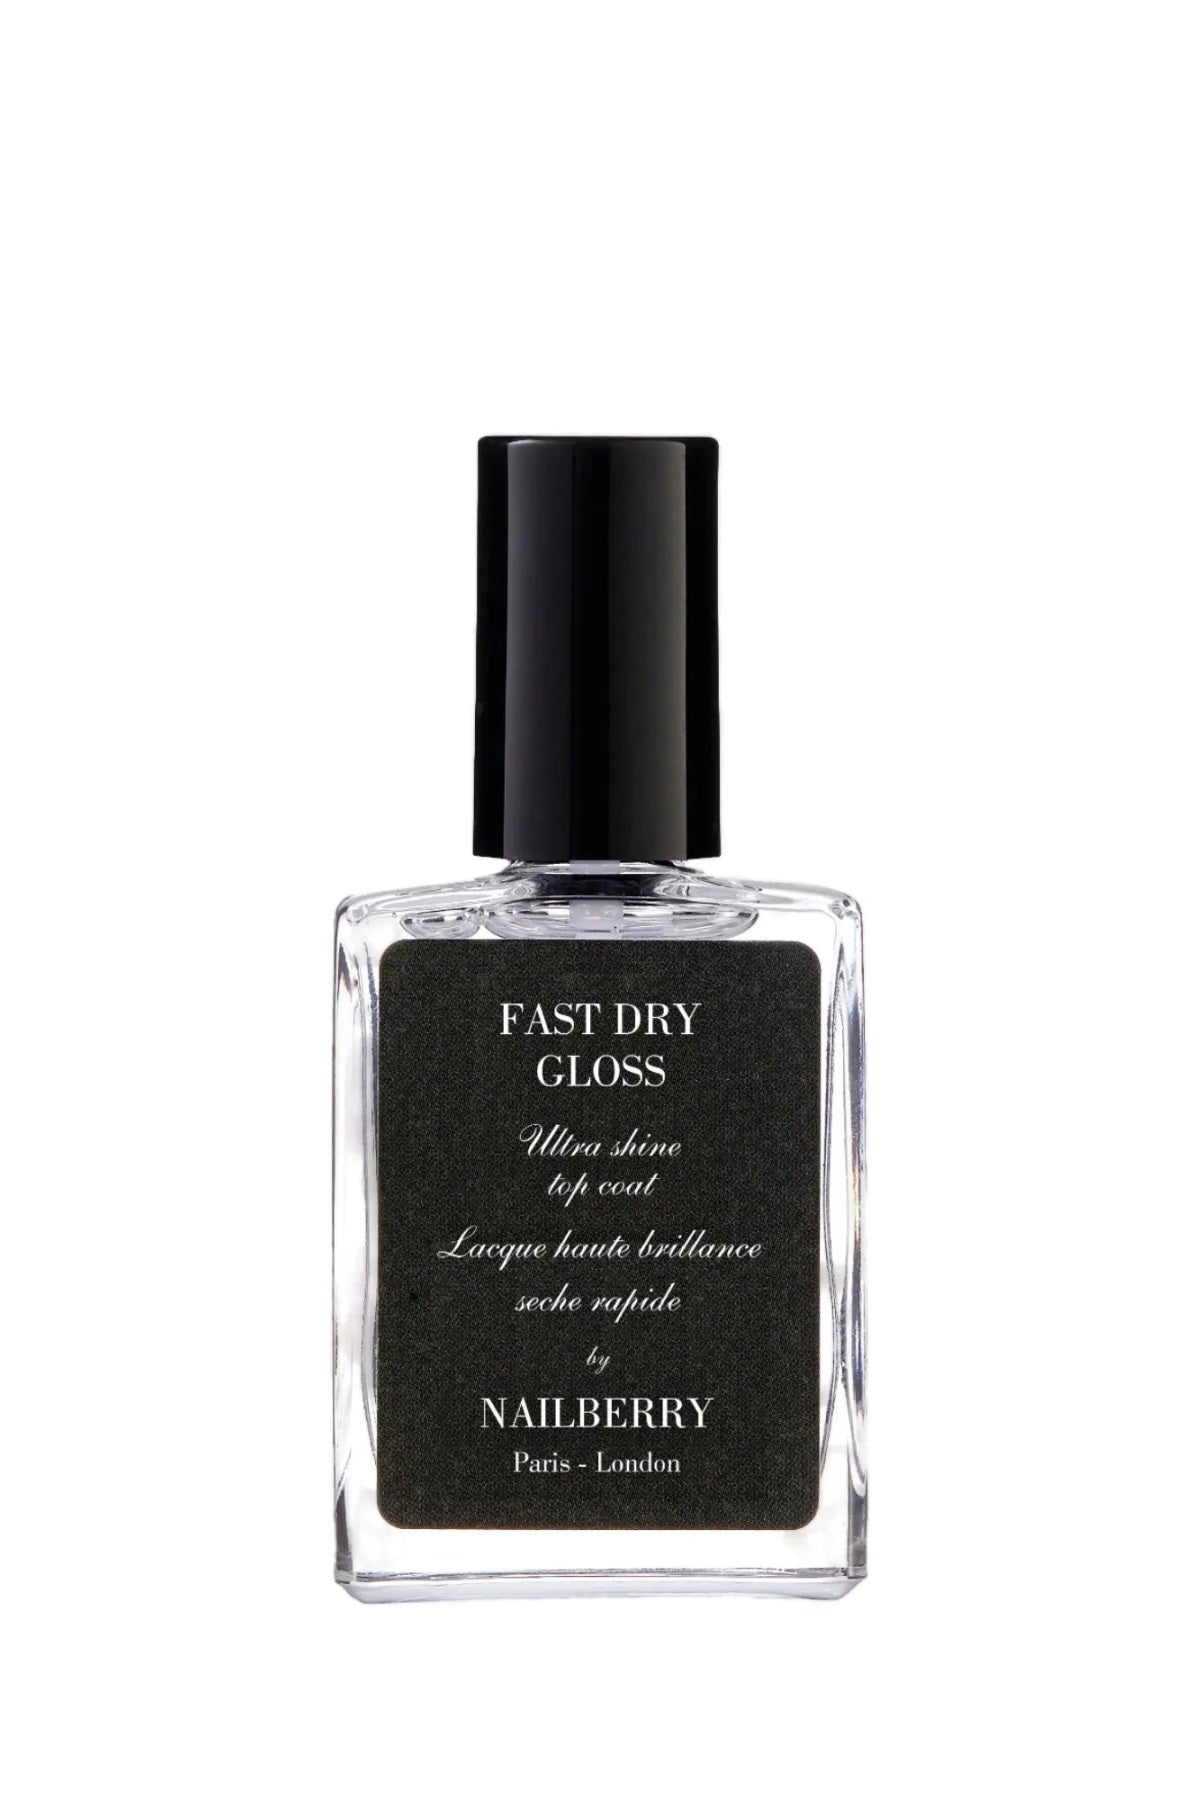 NAILBERRY Fast Dry Gloss Top Coat